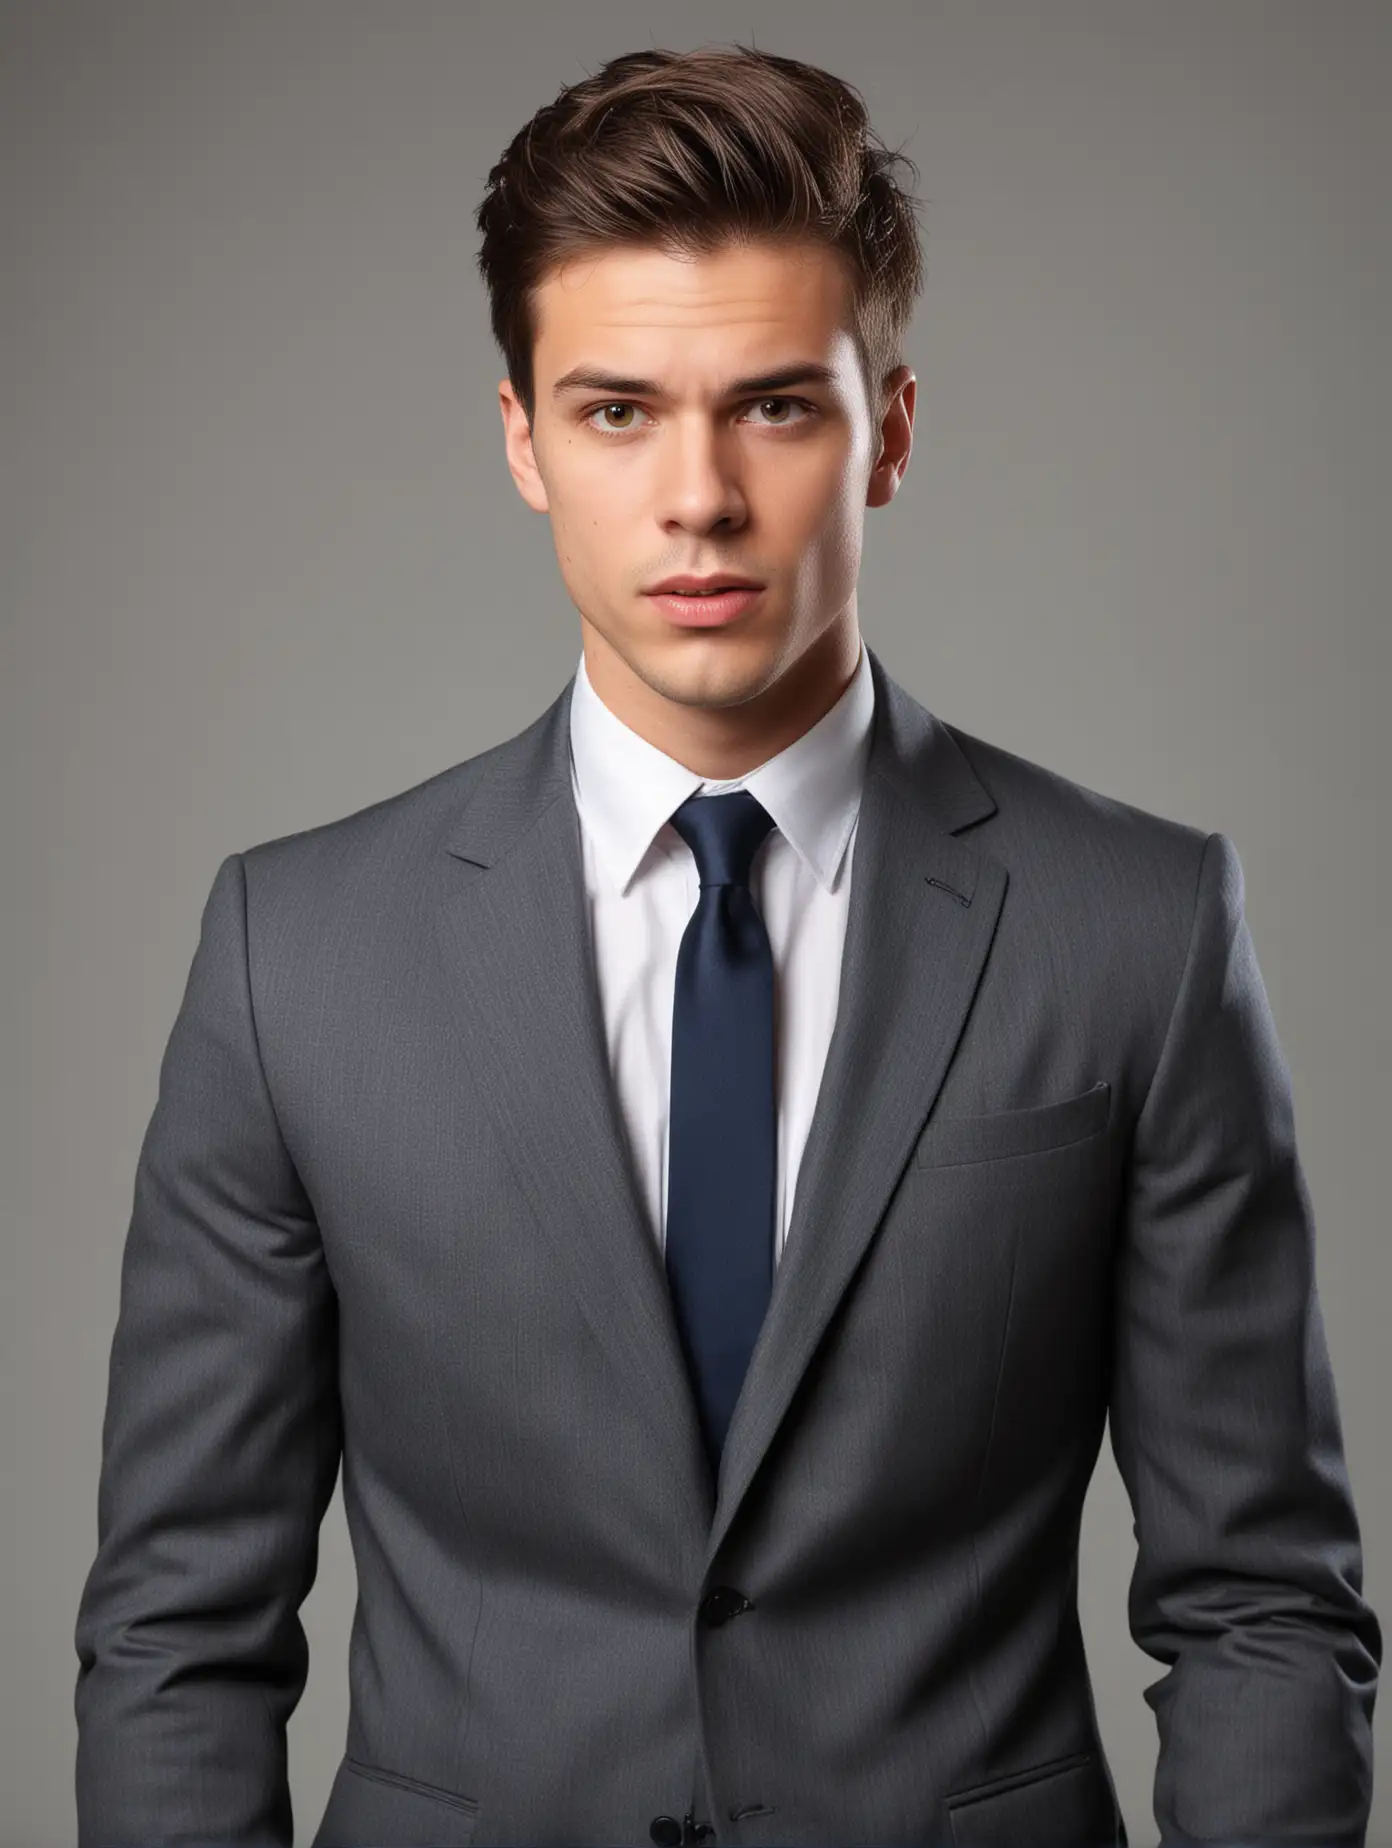 A handsome young man in a suit with a questioning expression on his face, gray background